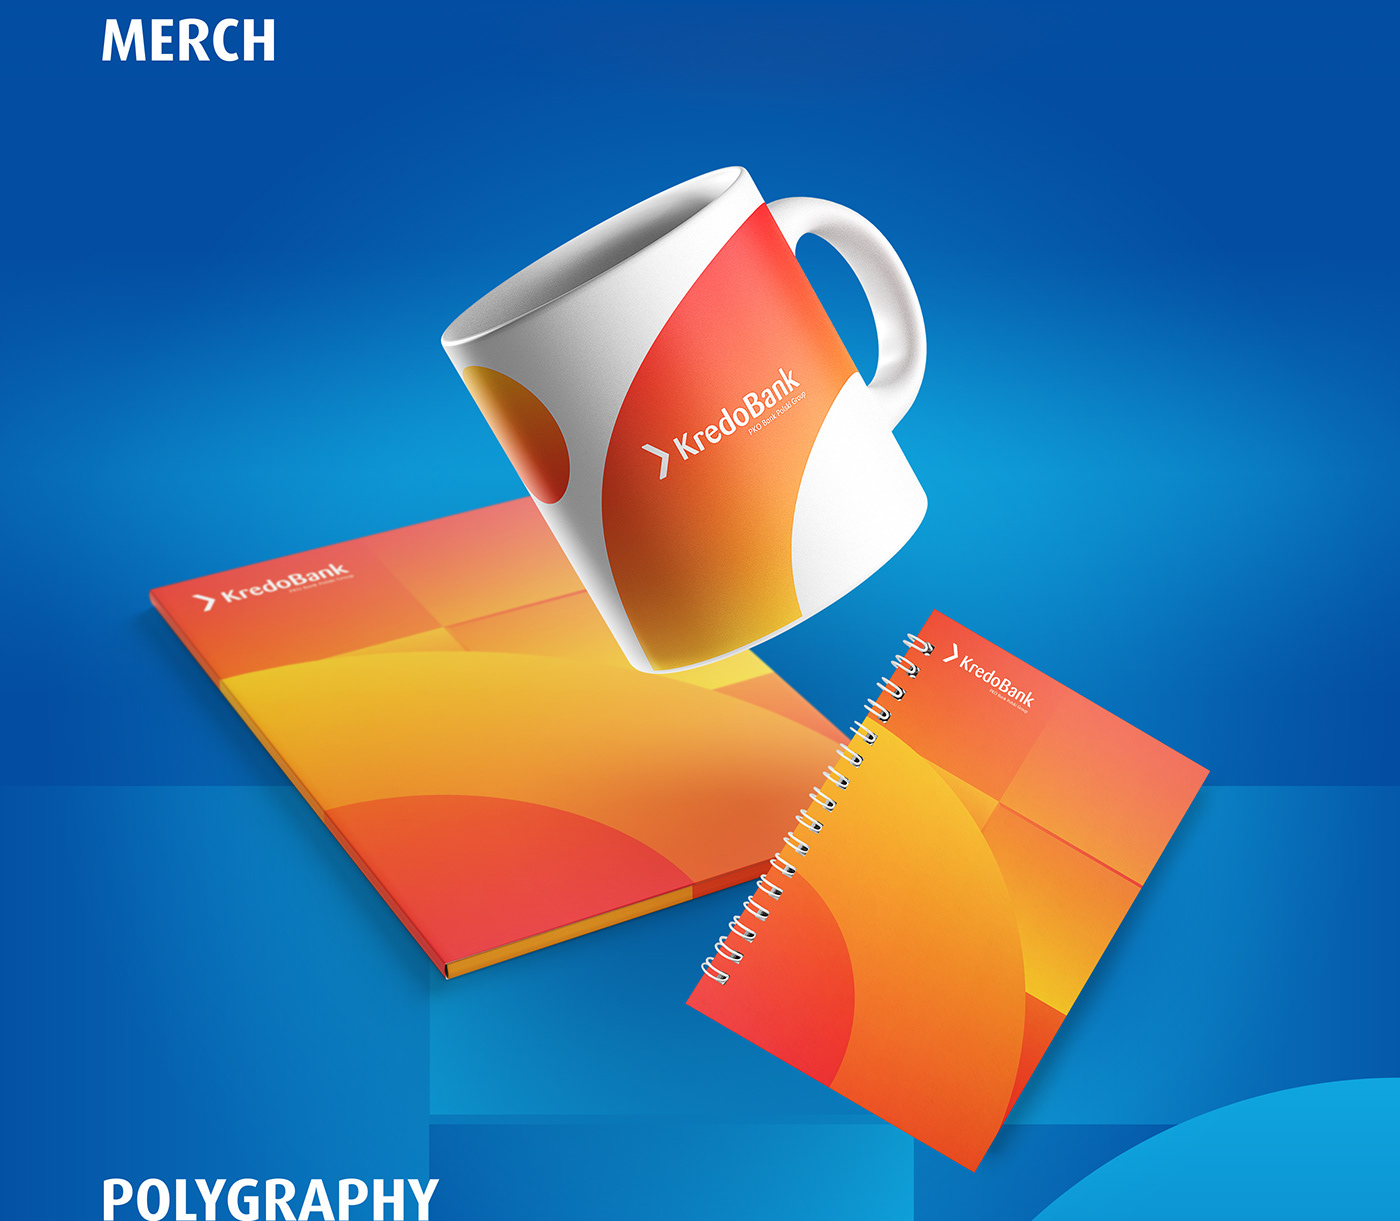 Bank card credit card product Corporate Identity branding  graphic design  Poster Design packaging design package